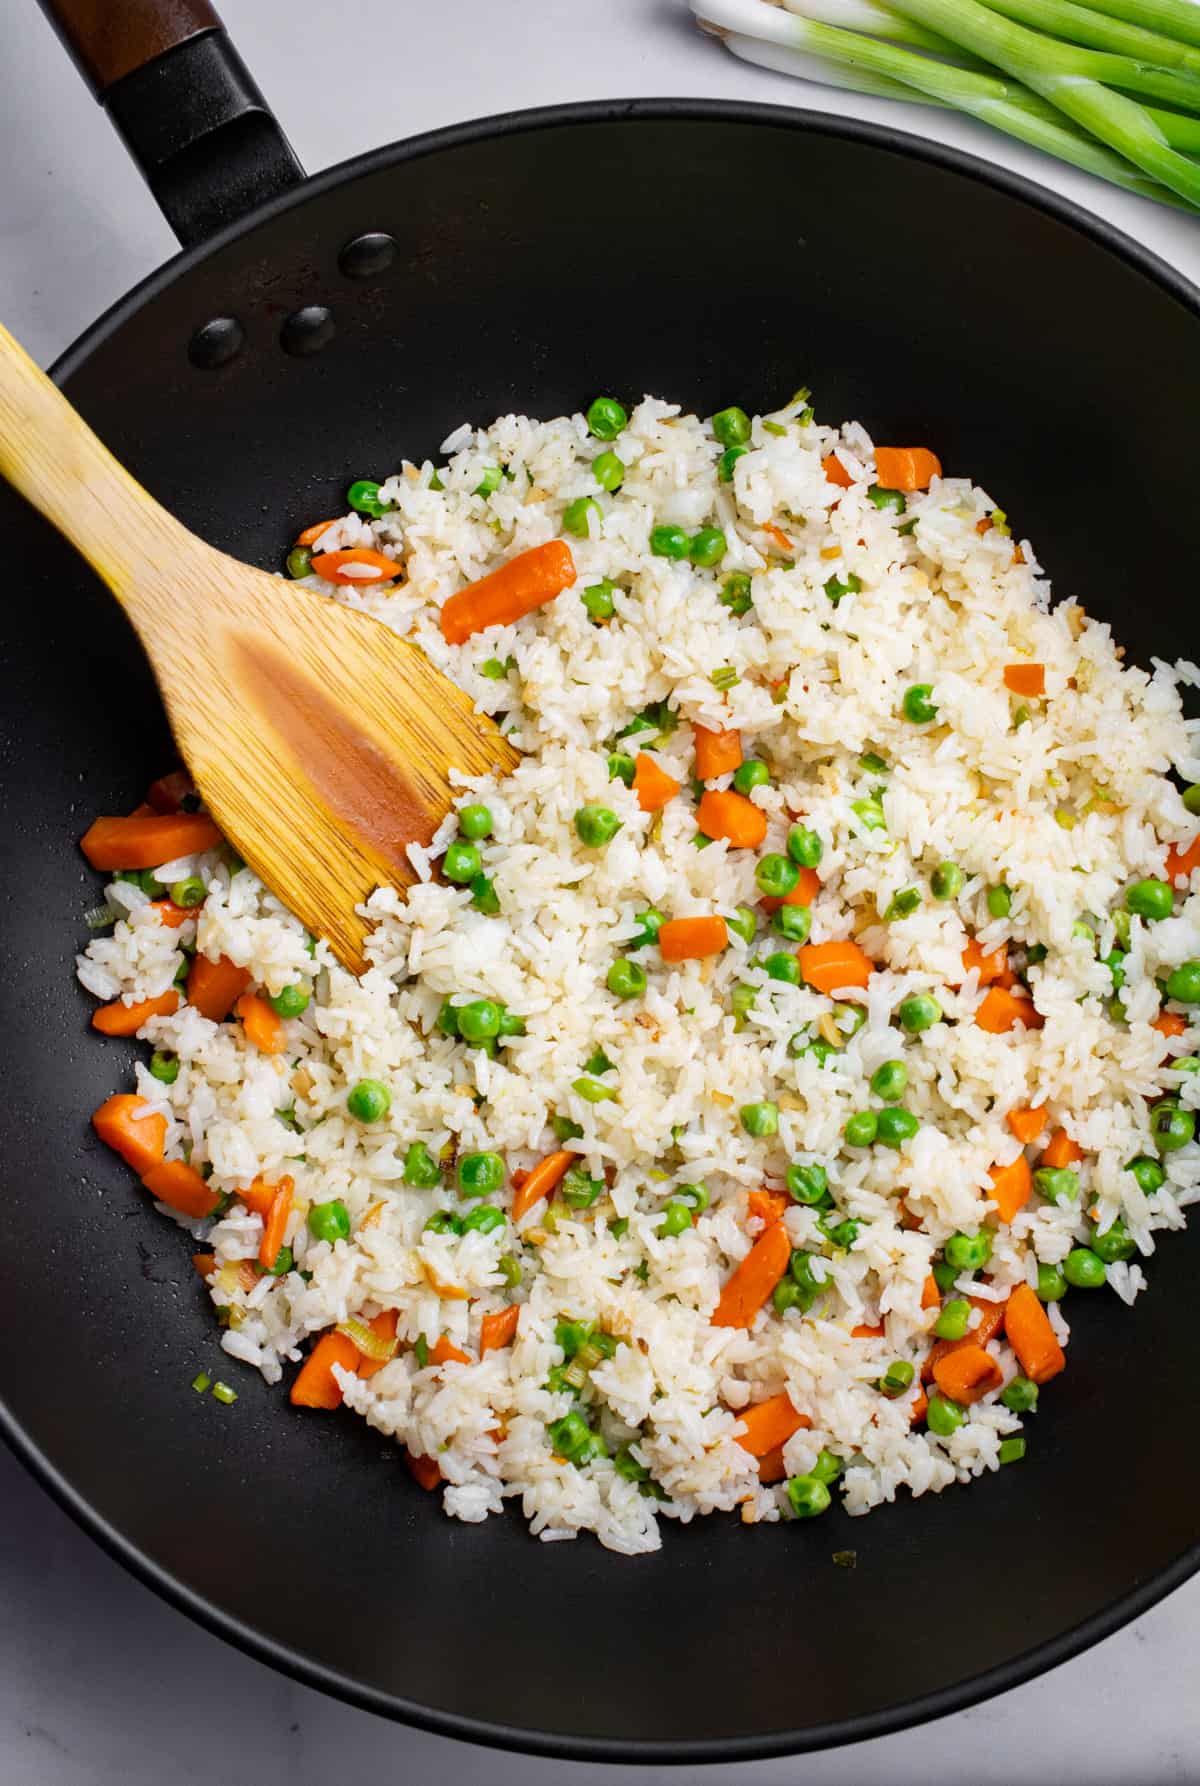 White rice, peas and carrots mixed in a wok.